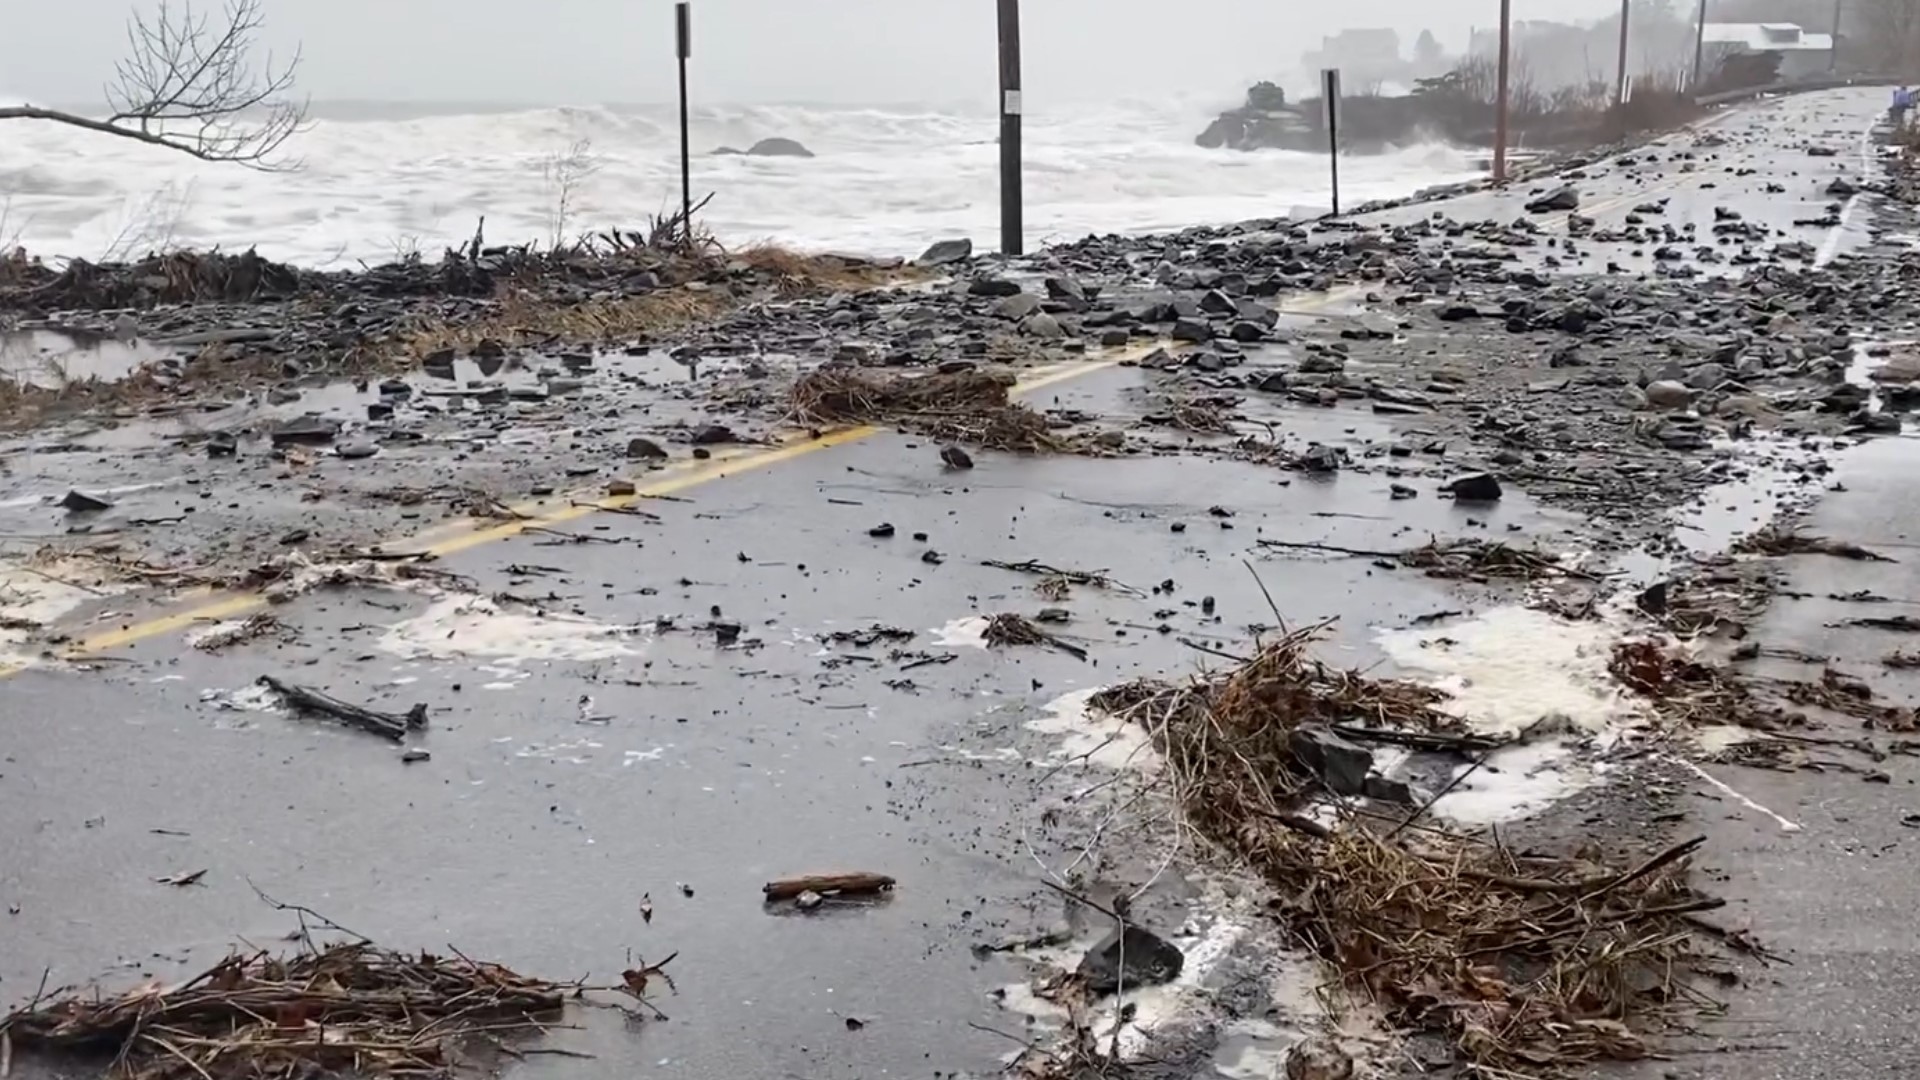 The quick-moving storm packed a punch, with severe flooding reported along the coast.